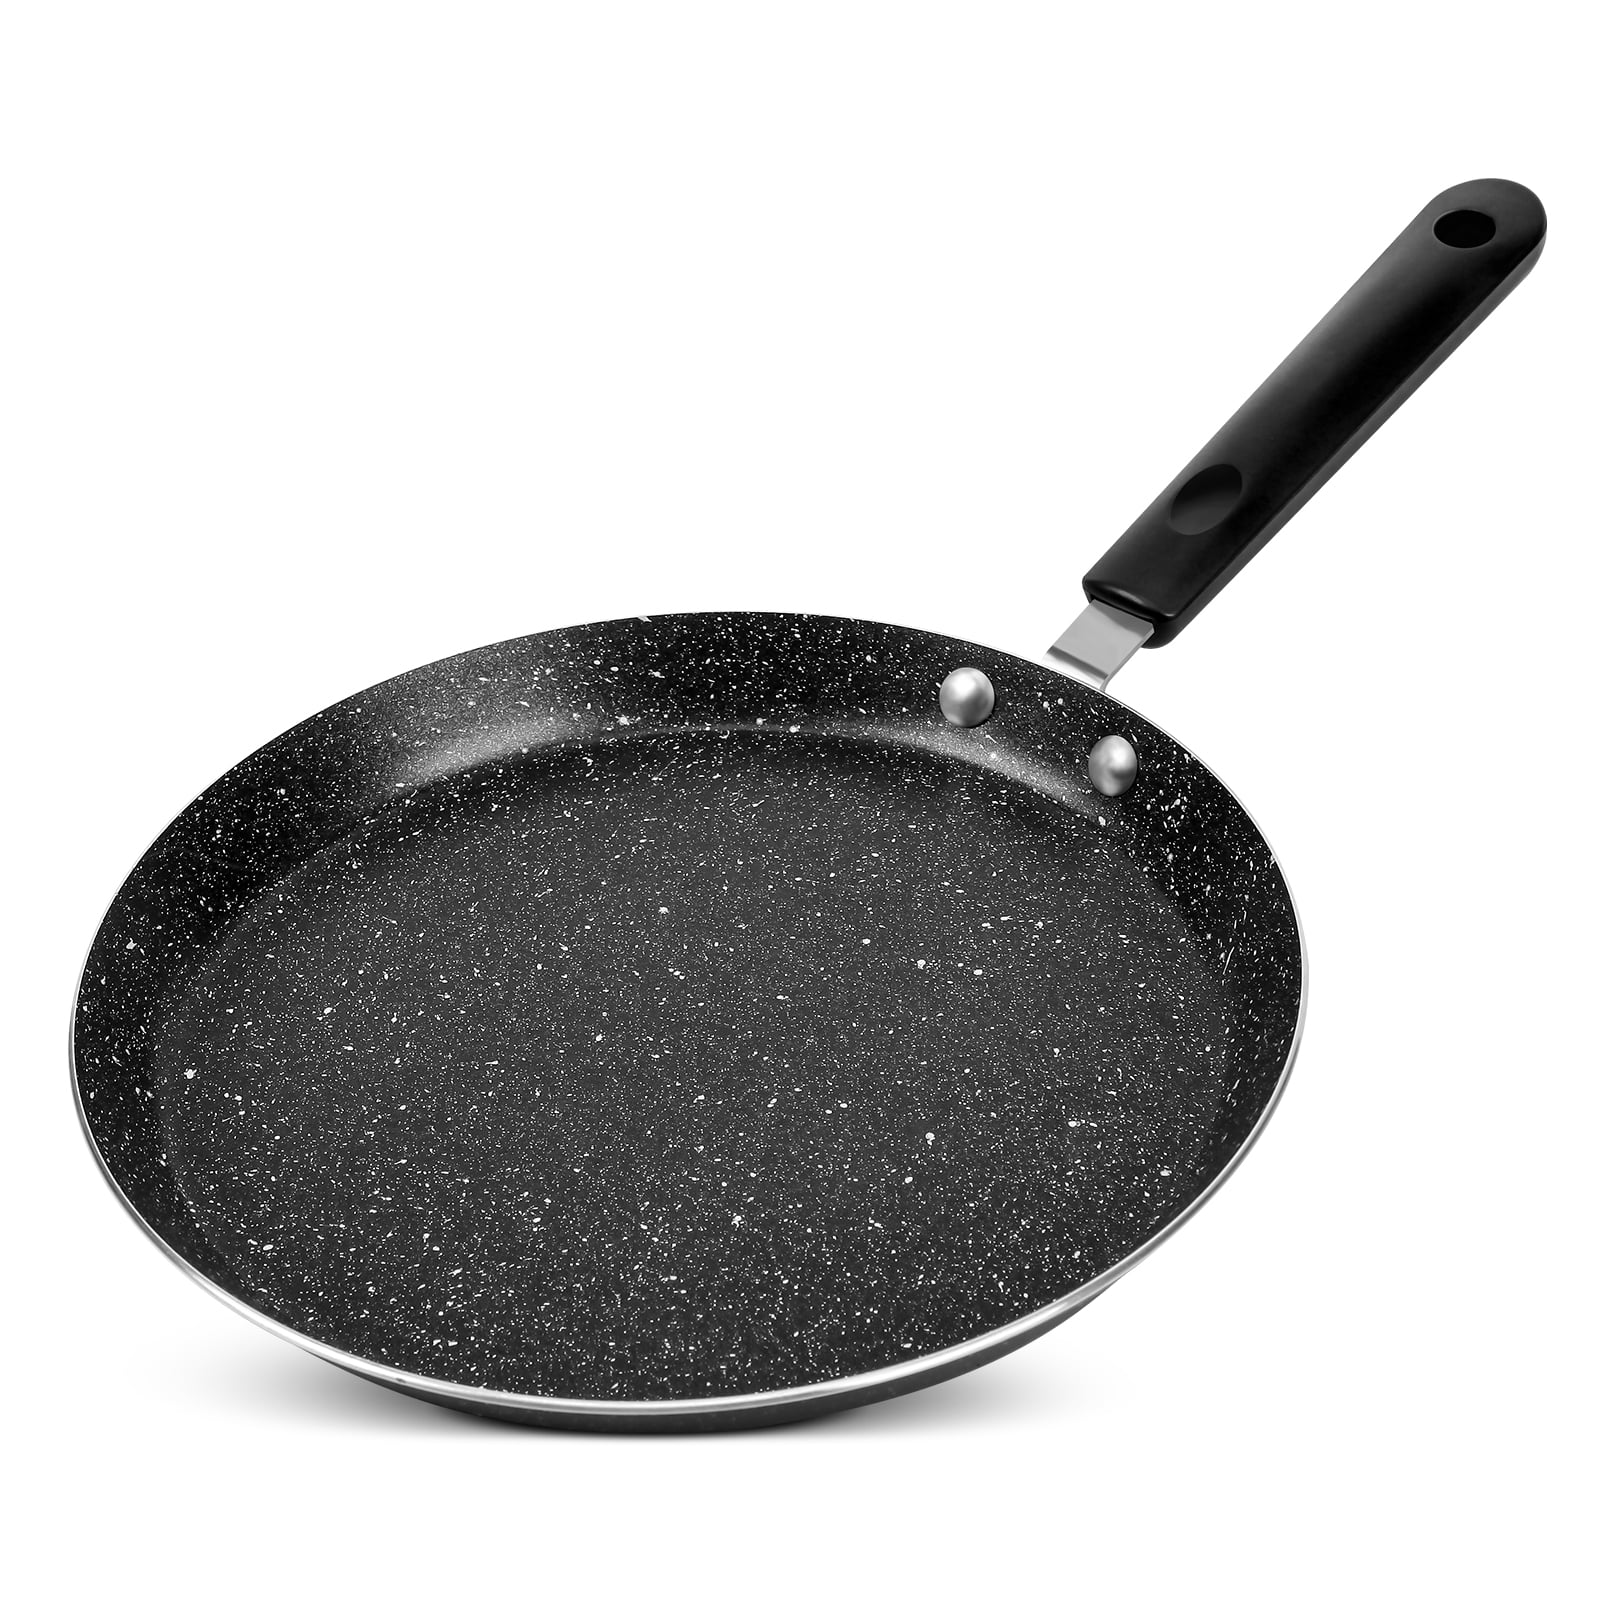 10X12cm Cast Iron Single Handle Square Frying Pans Uncoated Mini Kitchen  Utensils Home Breakfast Egg Non-Stick Pot Cooking Tools